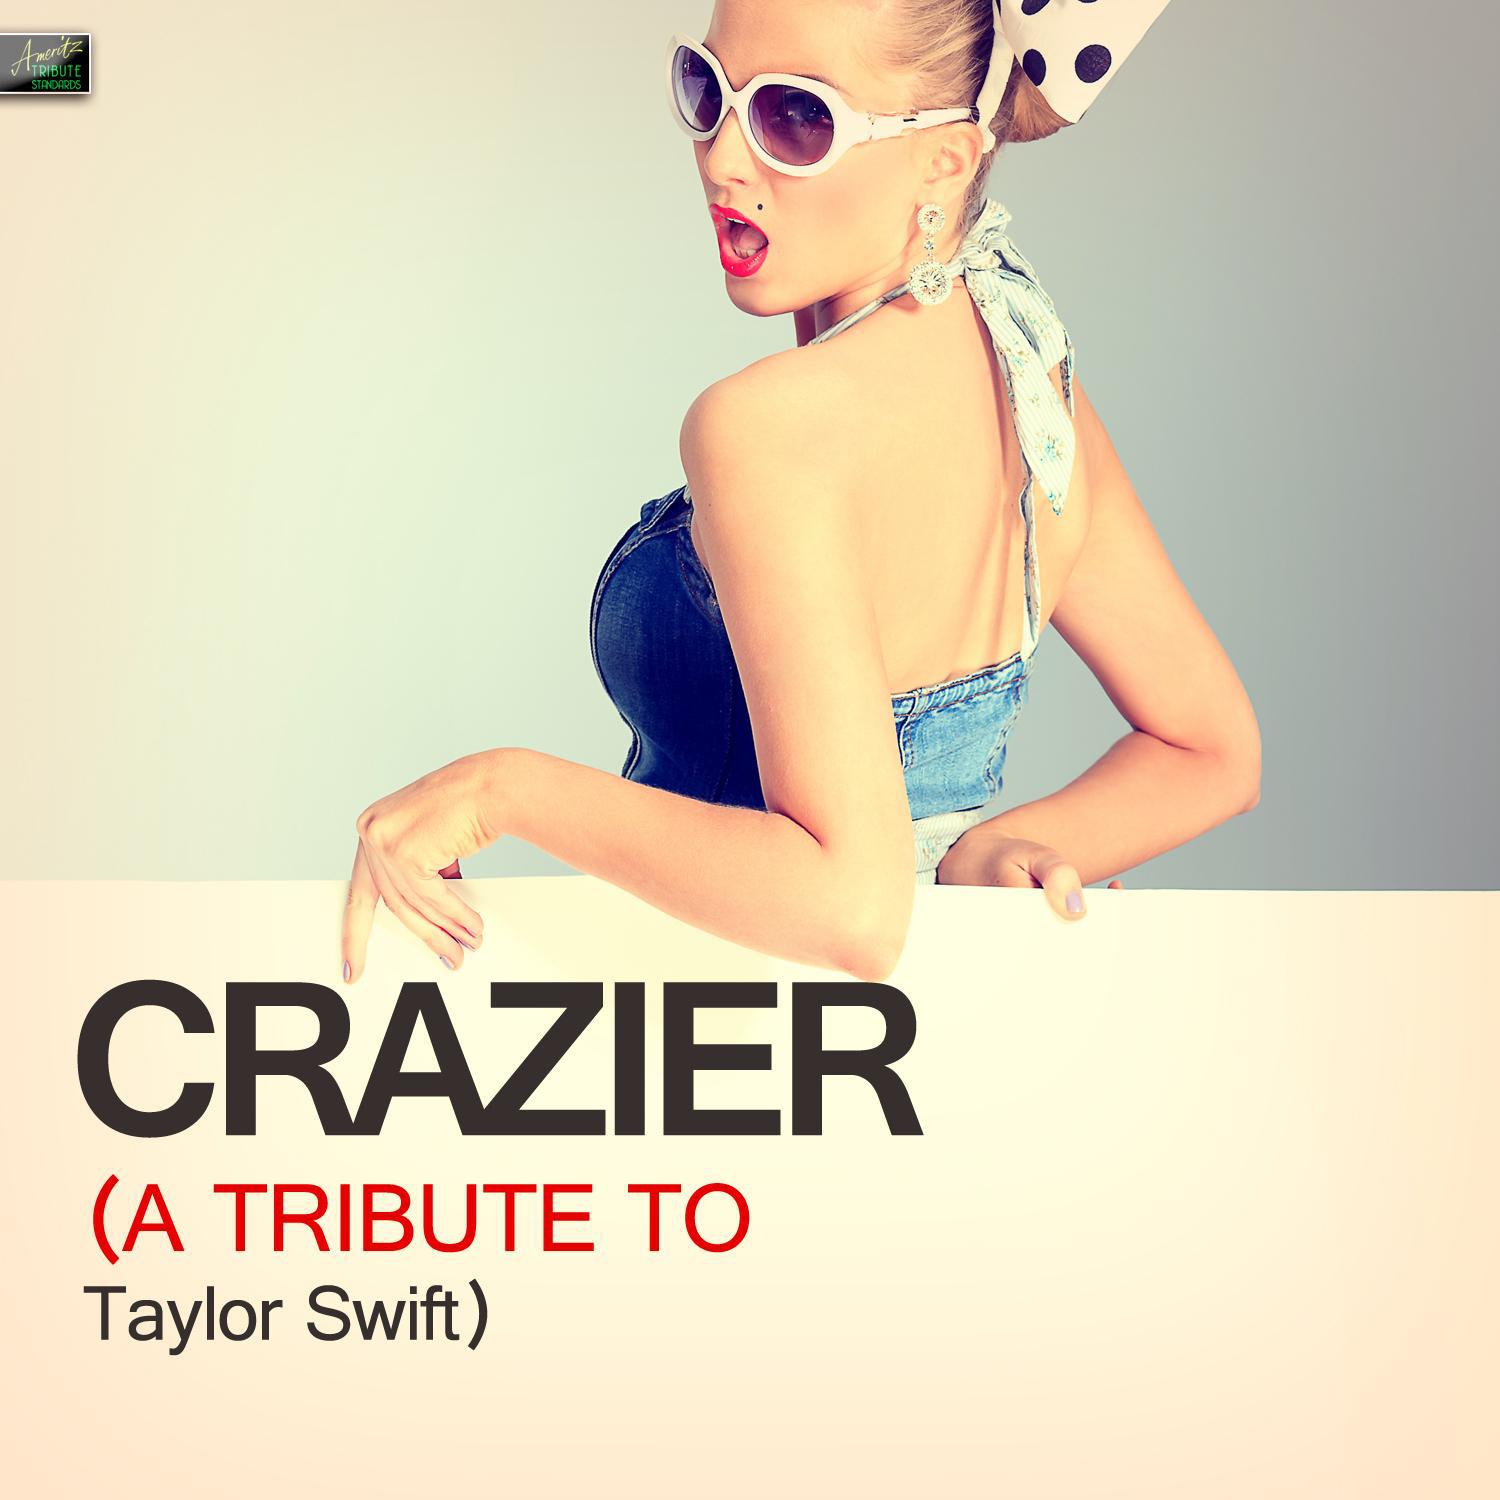 Crazier (A Tribute to Taylor Swift)